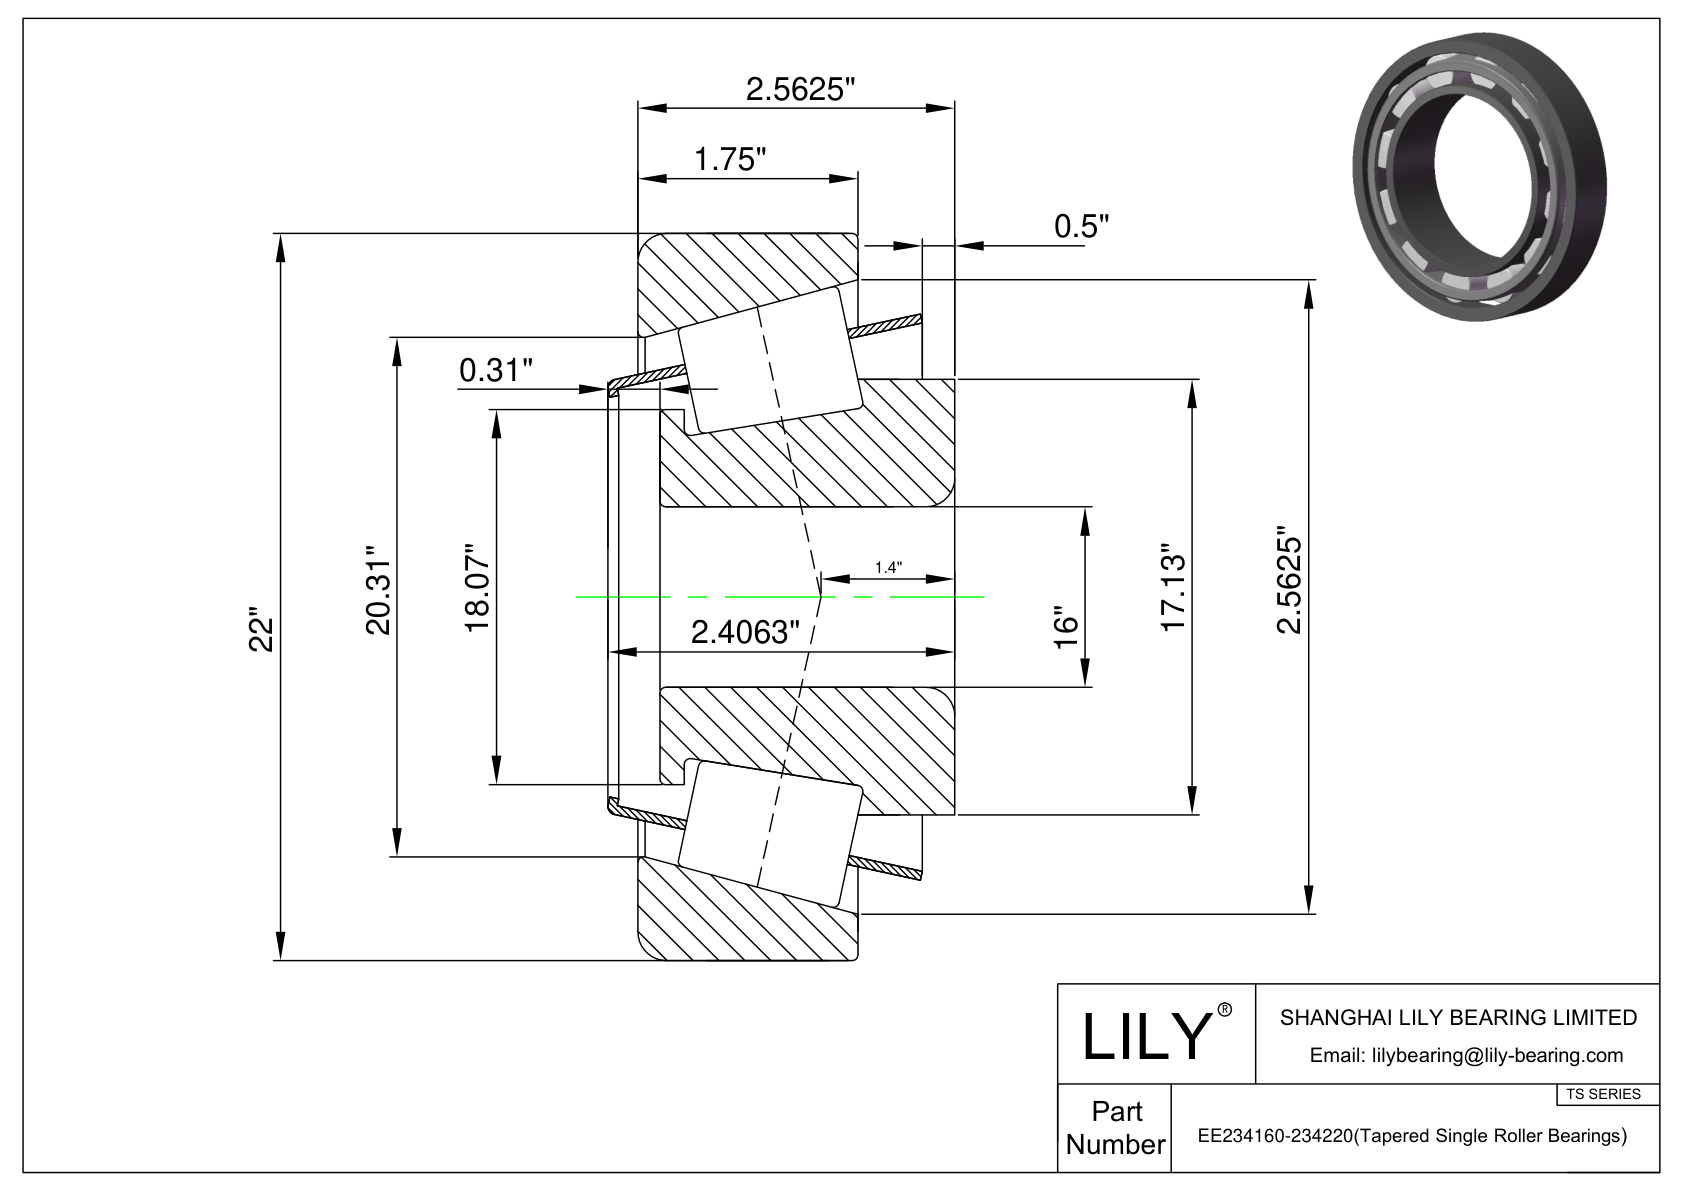 EE234160-234220 TS (Tapered Single Roller Bearings) (Imperial) cad drawing